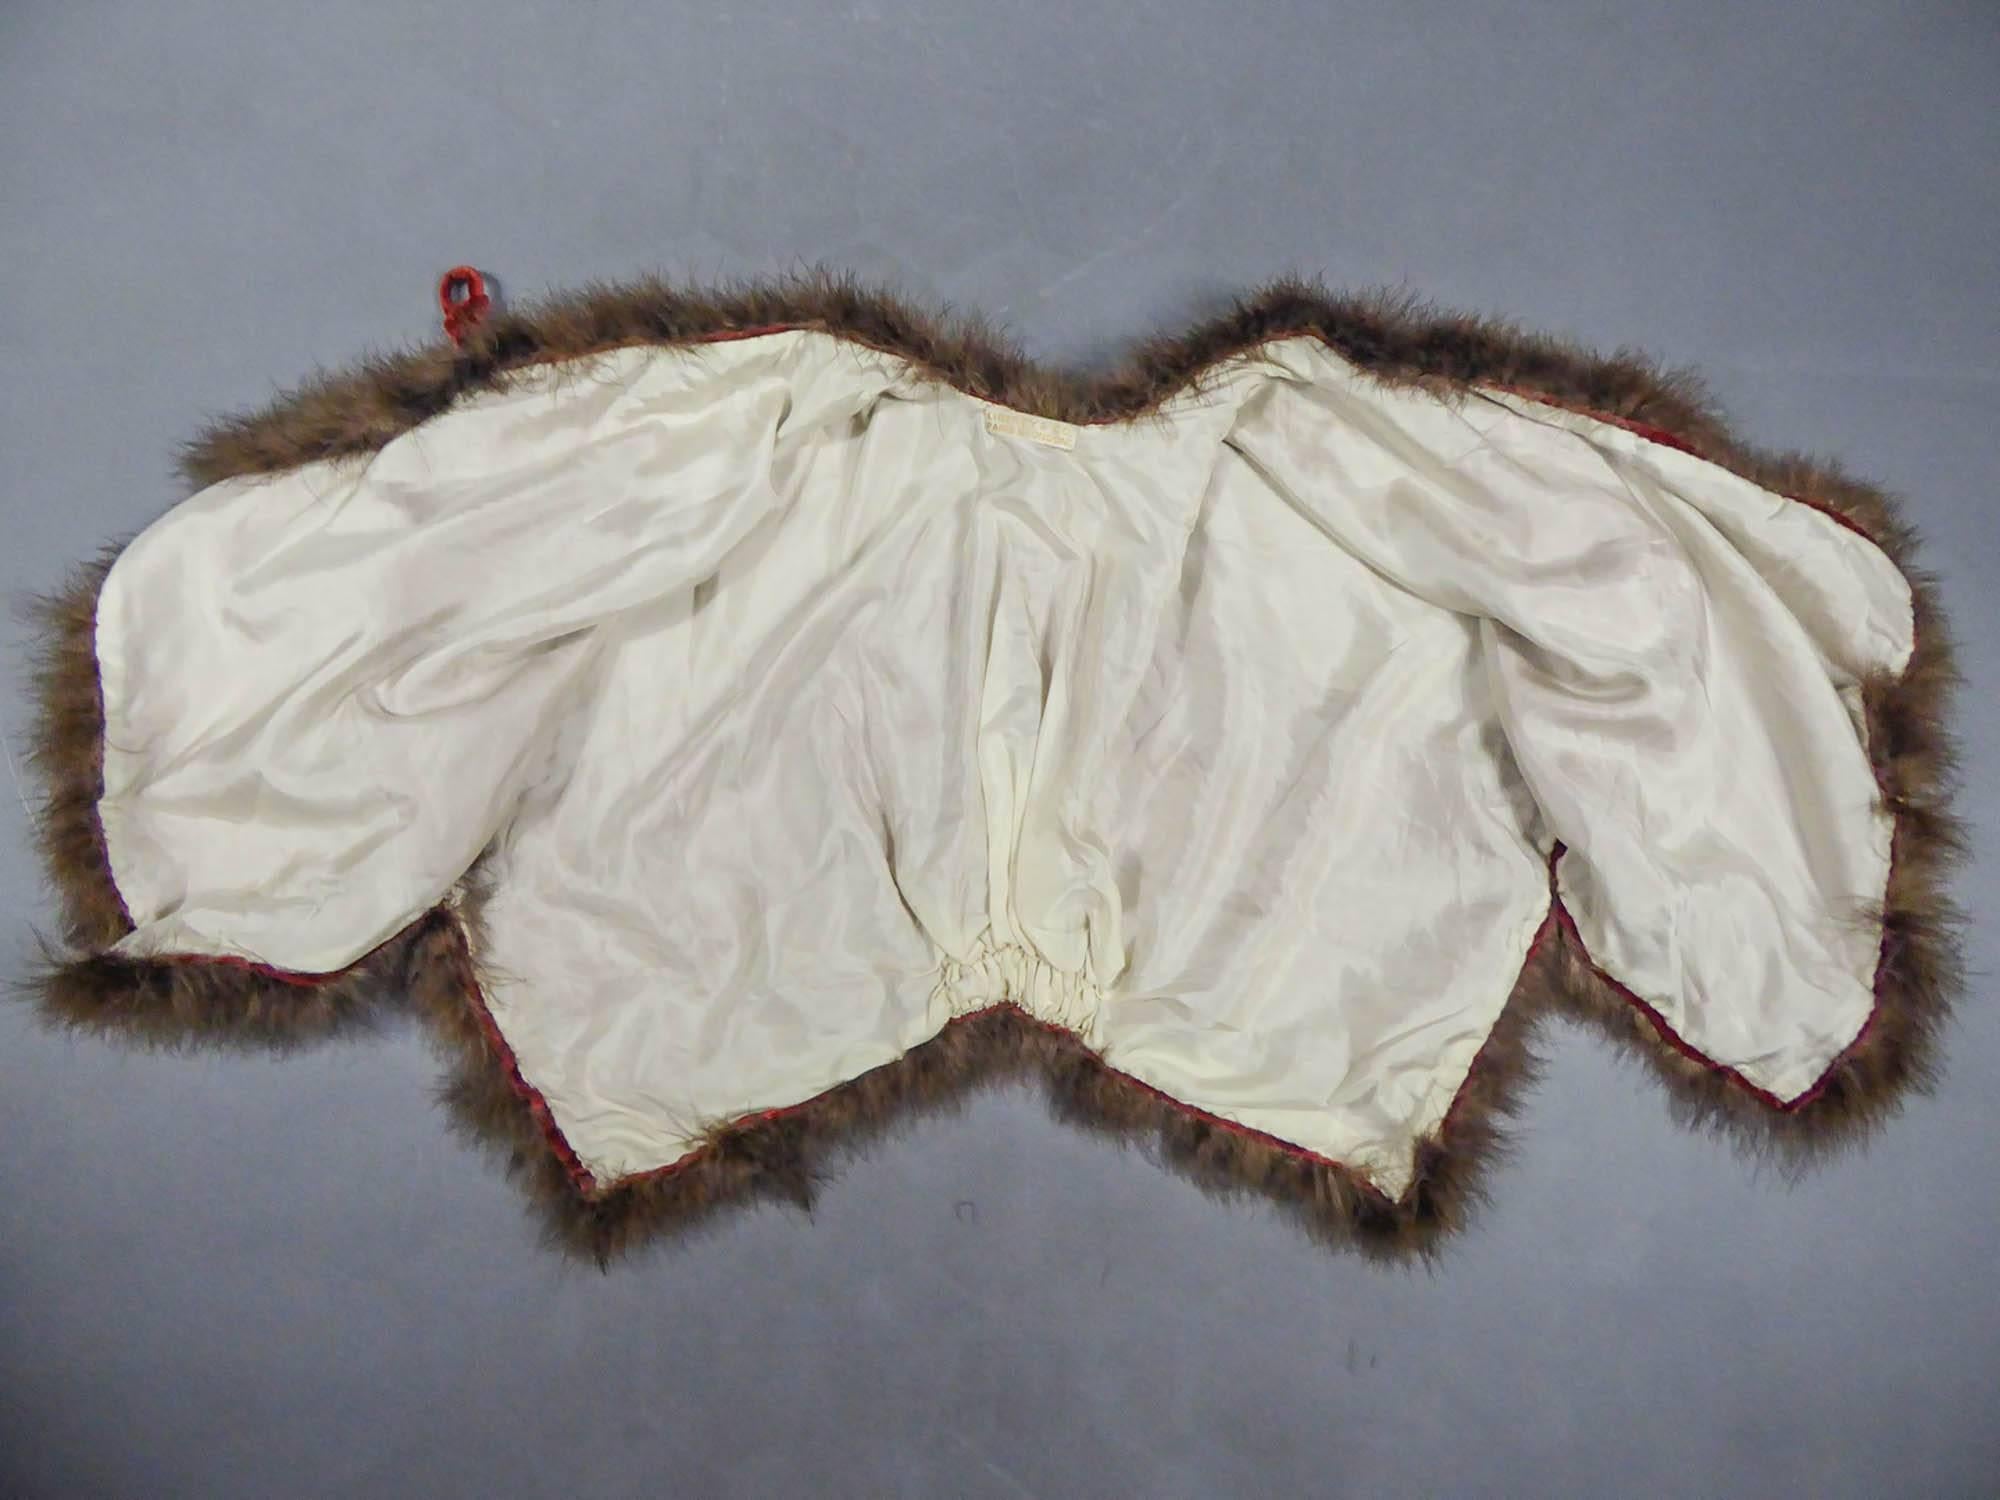 Women's Capeline or visit in velvet and swan feather - Liberty and Co - Circa 1920